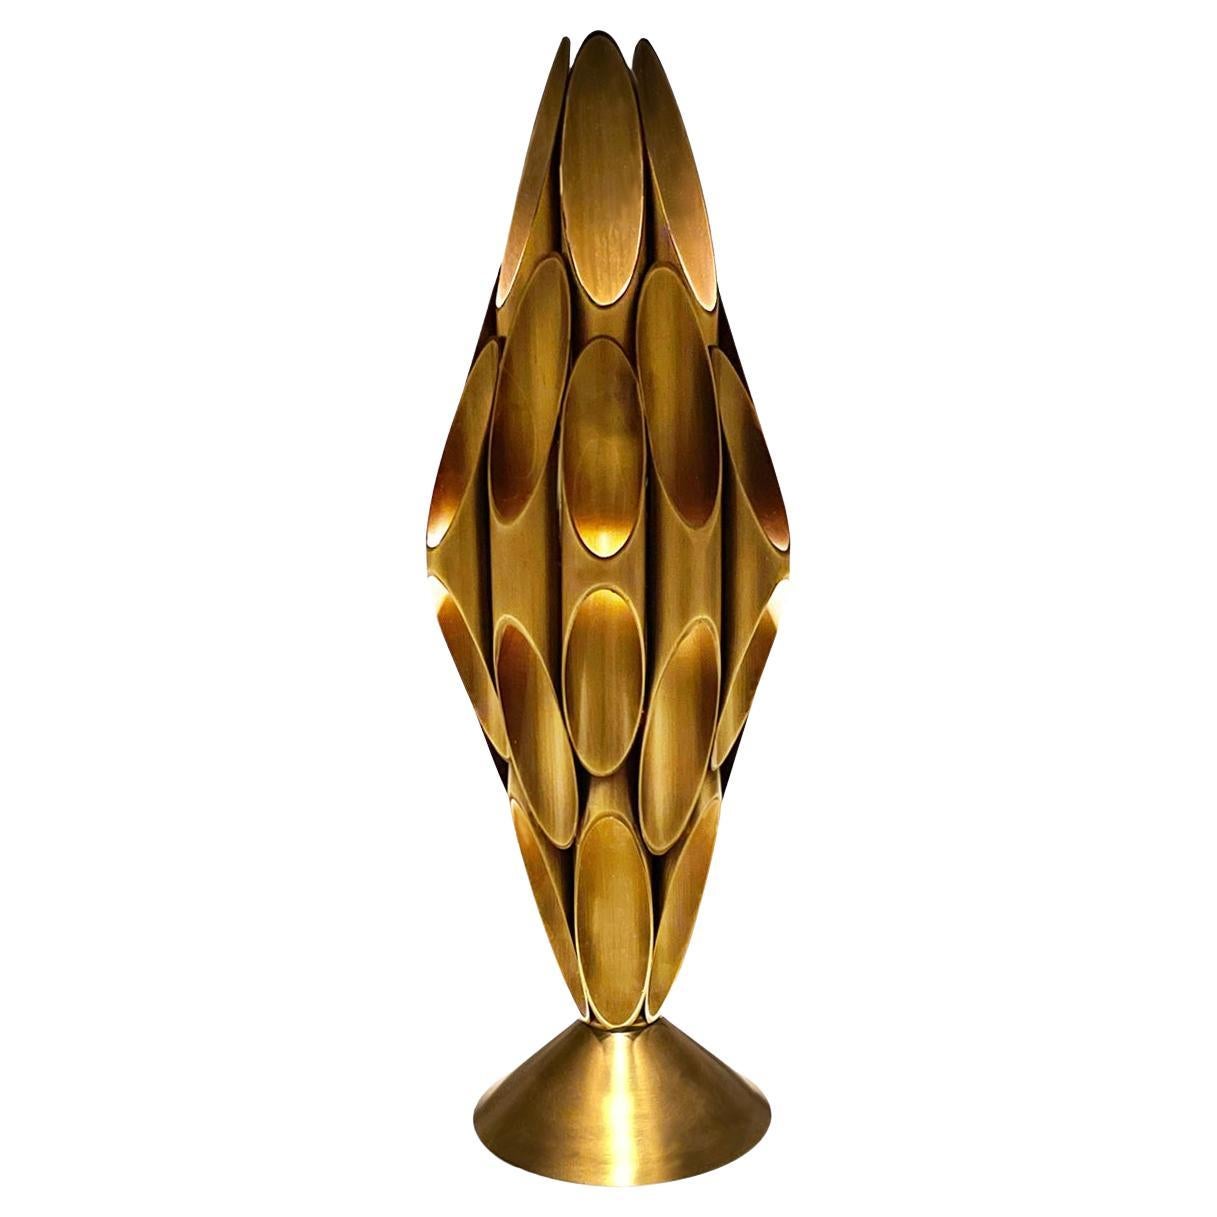 Hollywood Regency Tubular Table Sculpture Brass Accent Lamp after Mastercraft For Sale